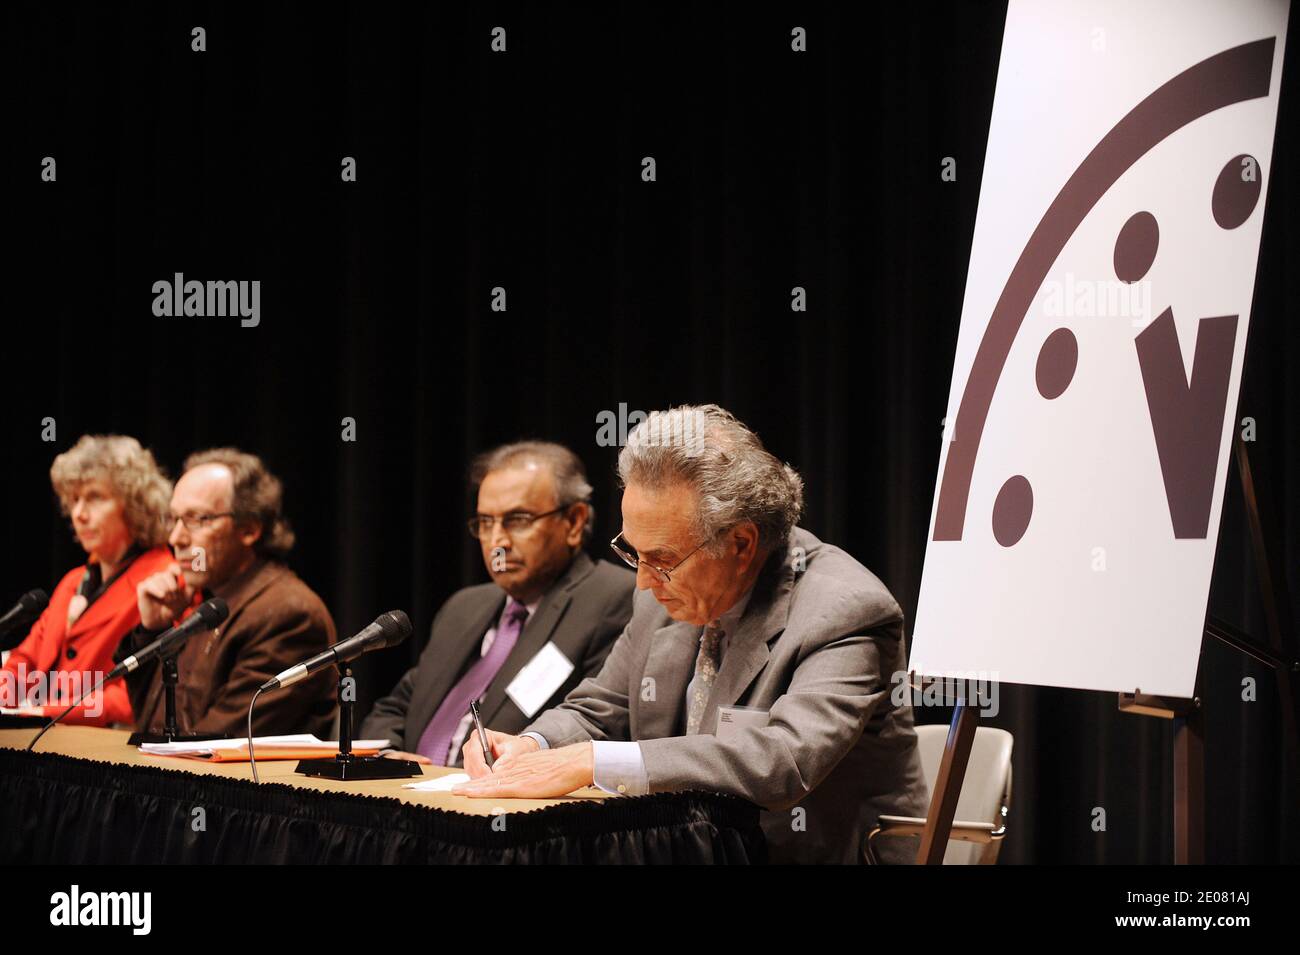 The Bulletin of the Atomic Scientists has reset the 'Doomsday Clock' to 5 minutes before midnight, a minute closer to humanity's imminent destruction, symbolized by 'midnight,' than last year during a press conference at the AAAS Auditorium January 10, 2012 in Washington, DC, USA. The clock is a symbol of the threat of humanity's imminent destruction from nuclear or biological weapons, climate change and other human-caused disasters. Photo by Olivier Douliery/ABACAPRESS.COM Stock Photo